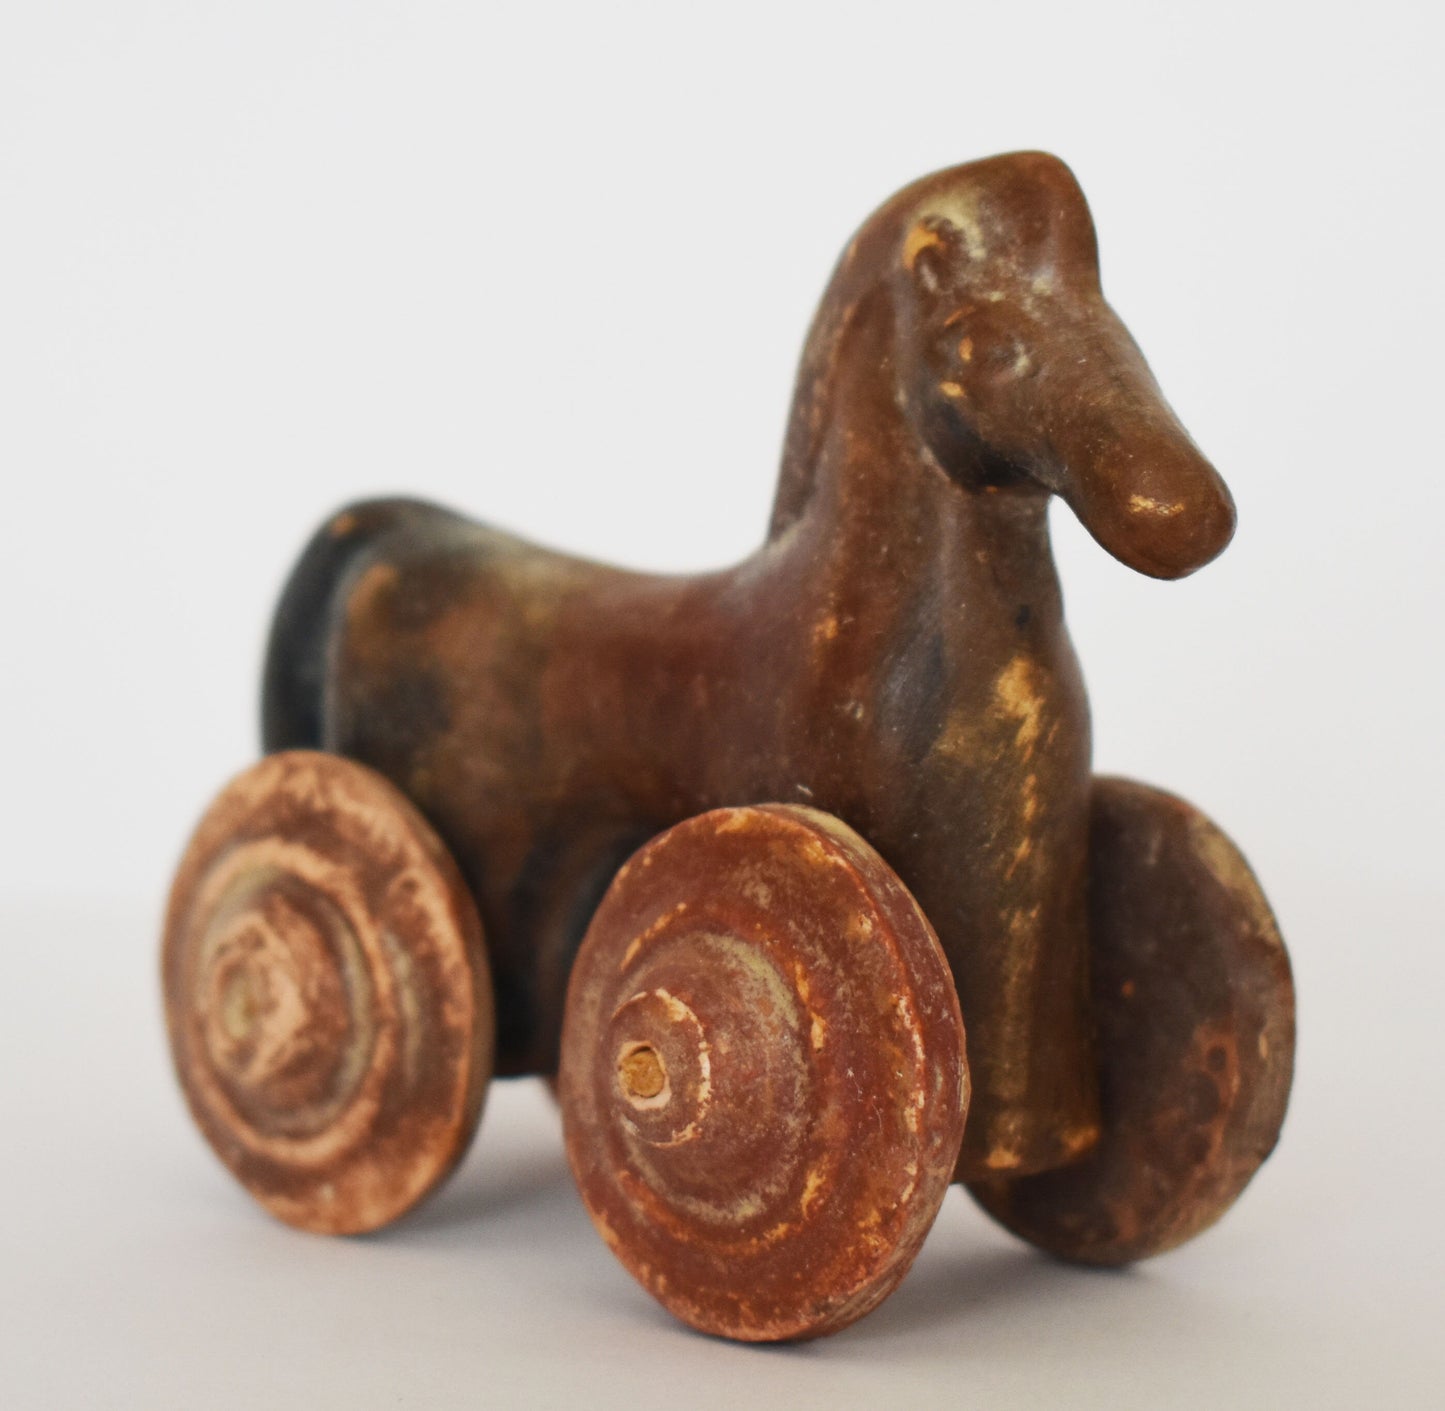 Horse on Wheels  - Children's Toy - Athens, Attica - 500 BC - Small - Museum Reproduction  - Ceramic Artifact